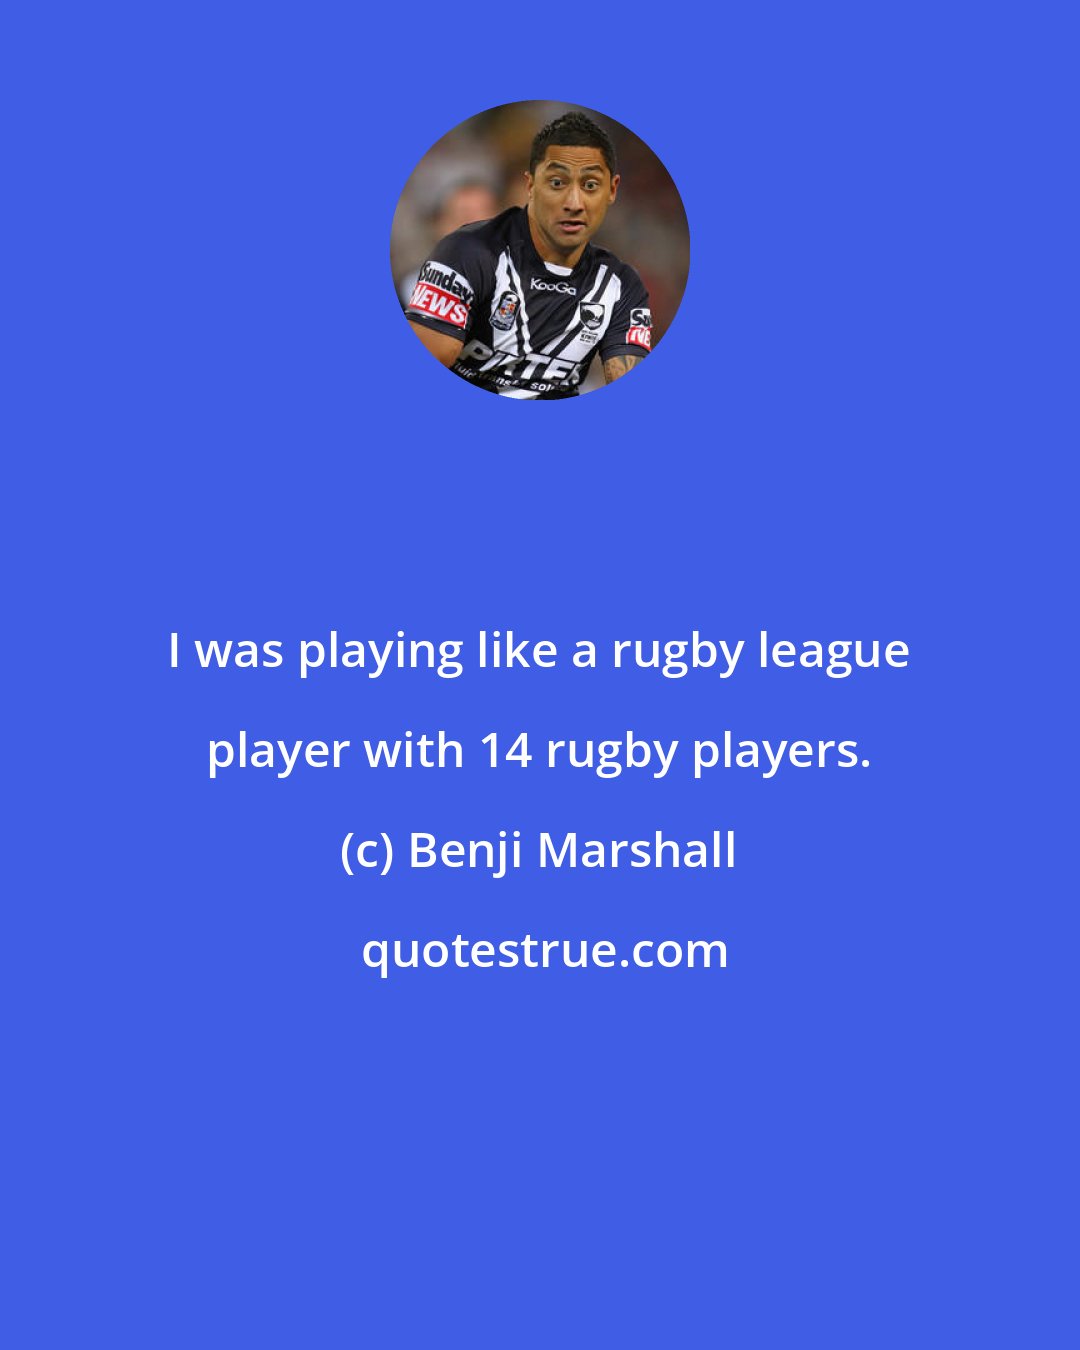 Benji Marshall: I was playing like a rugby league player with 14 rugby players.